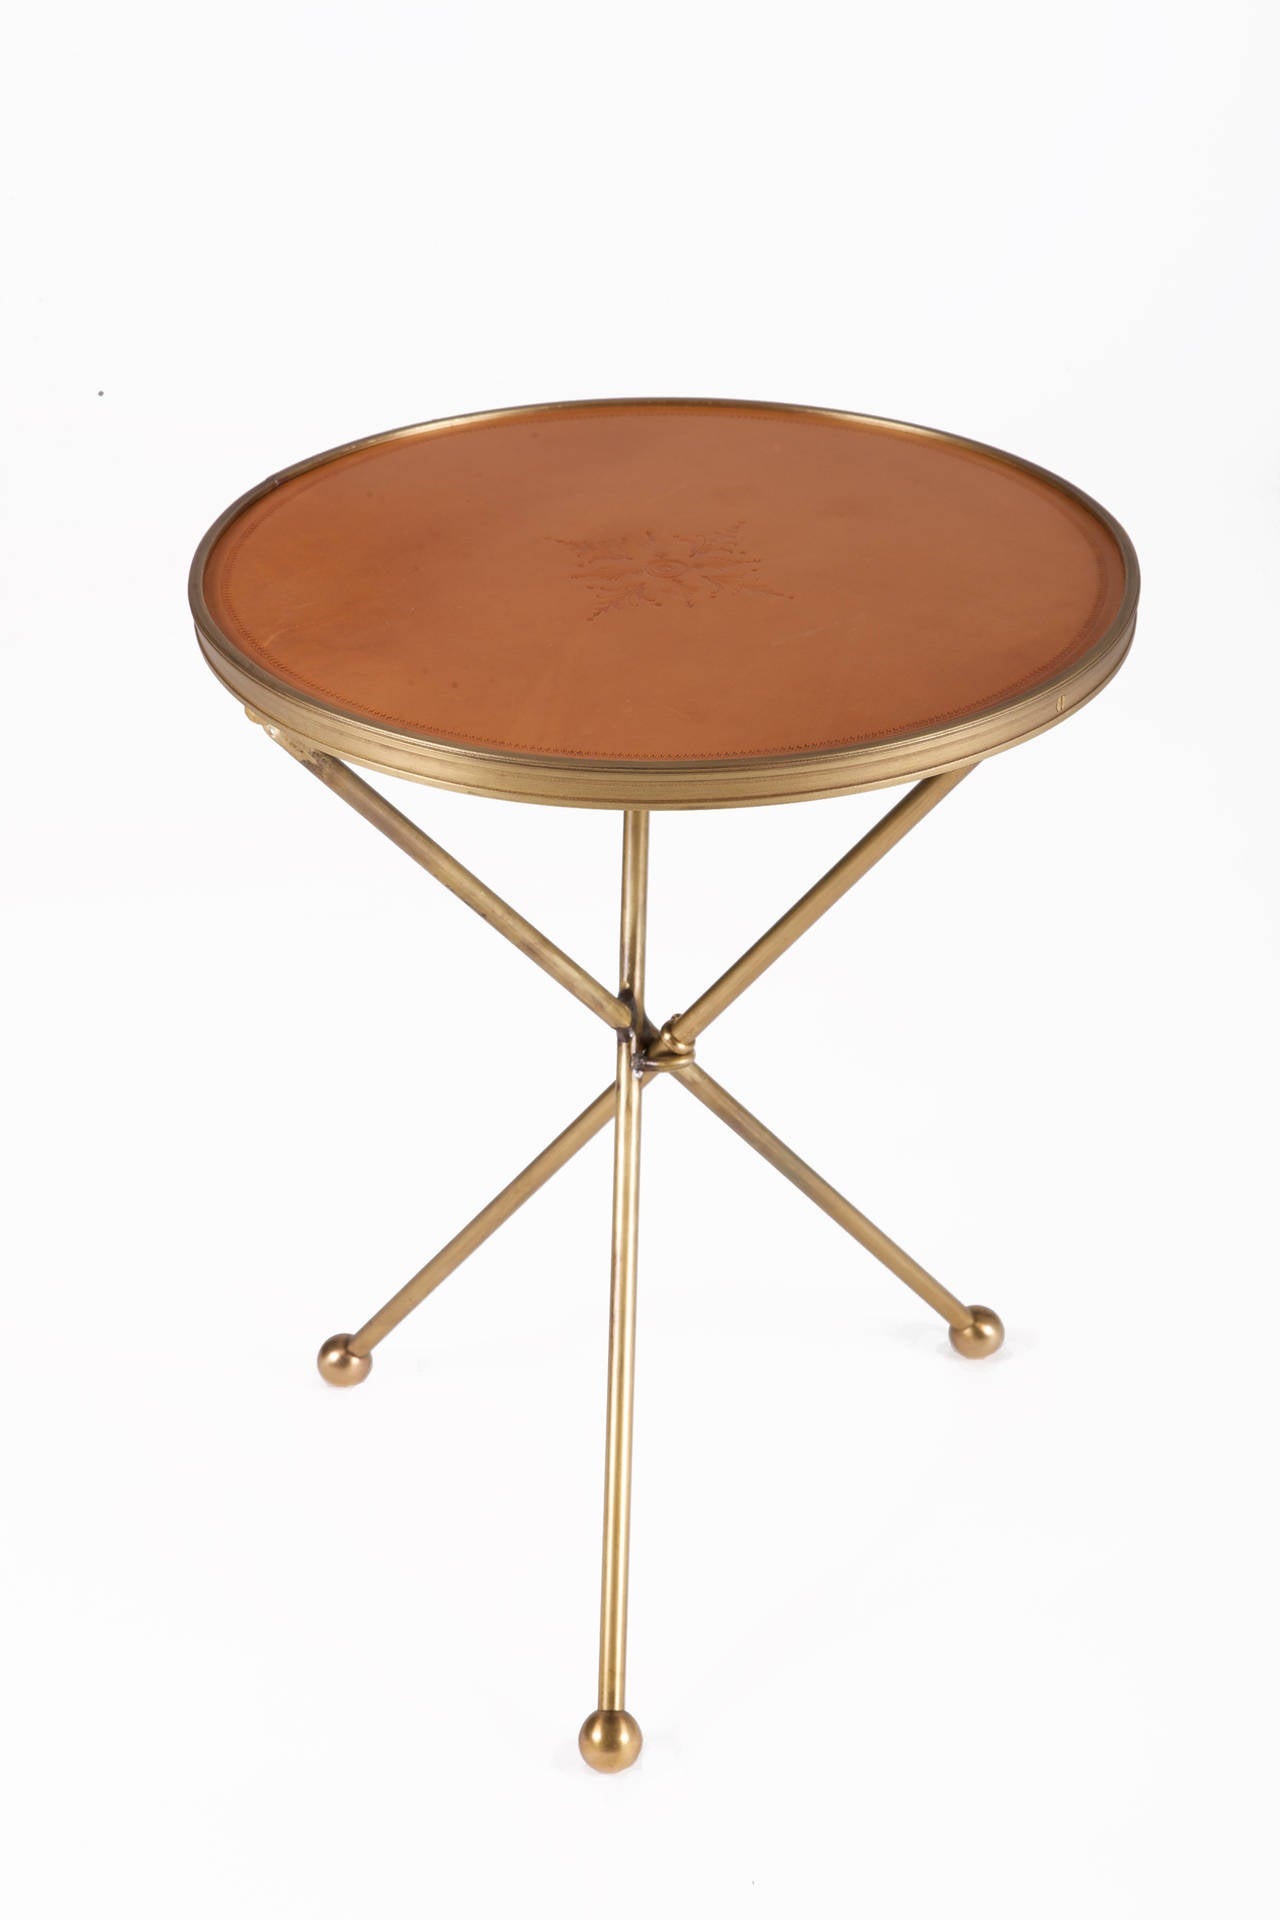 Contemporary Folding Brass Side Table For Sale